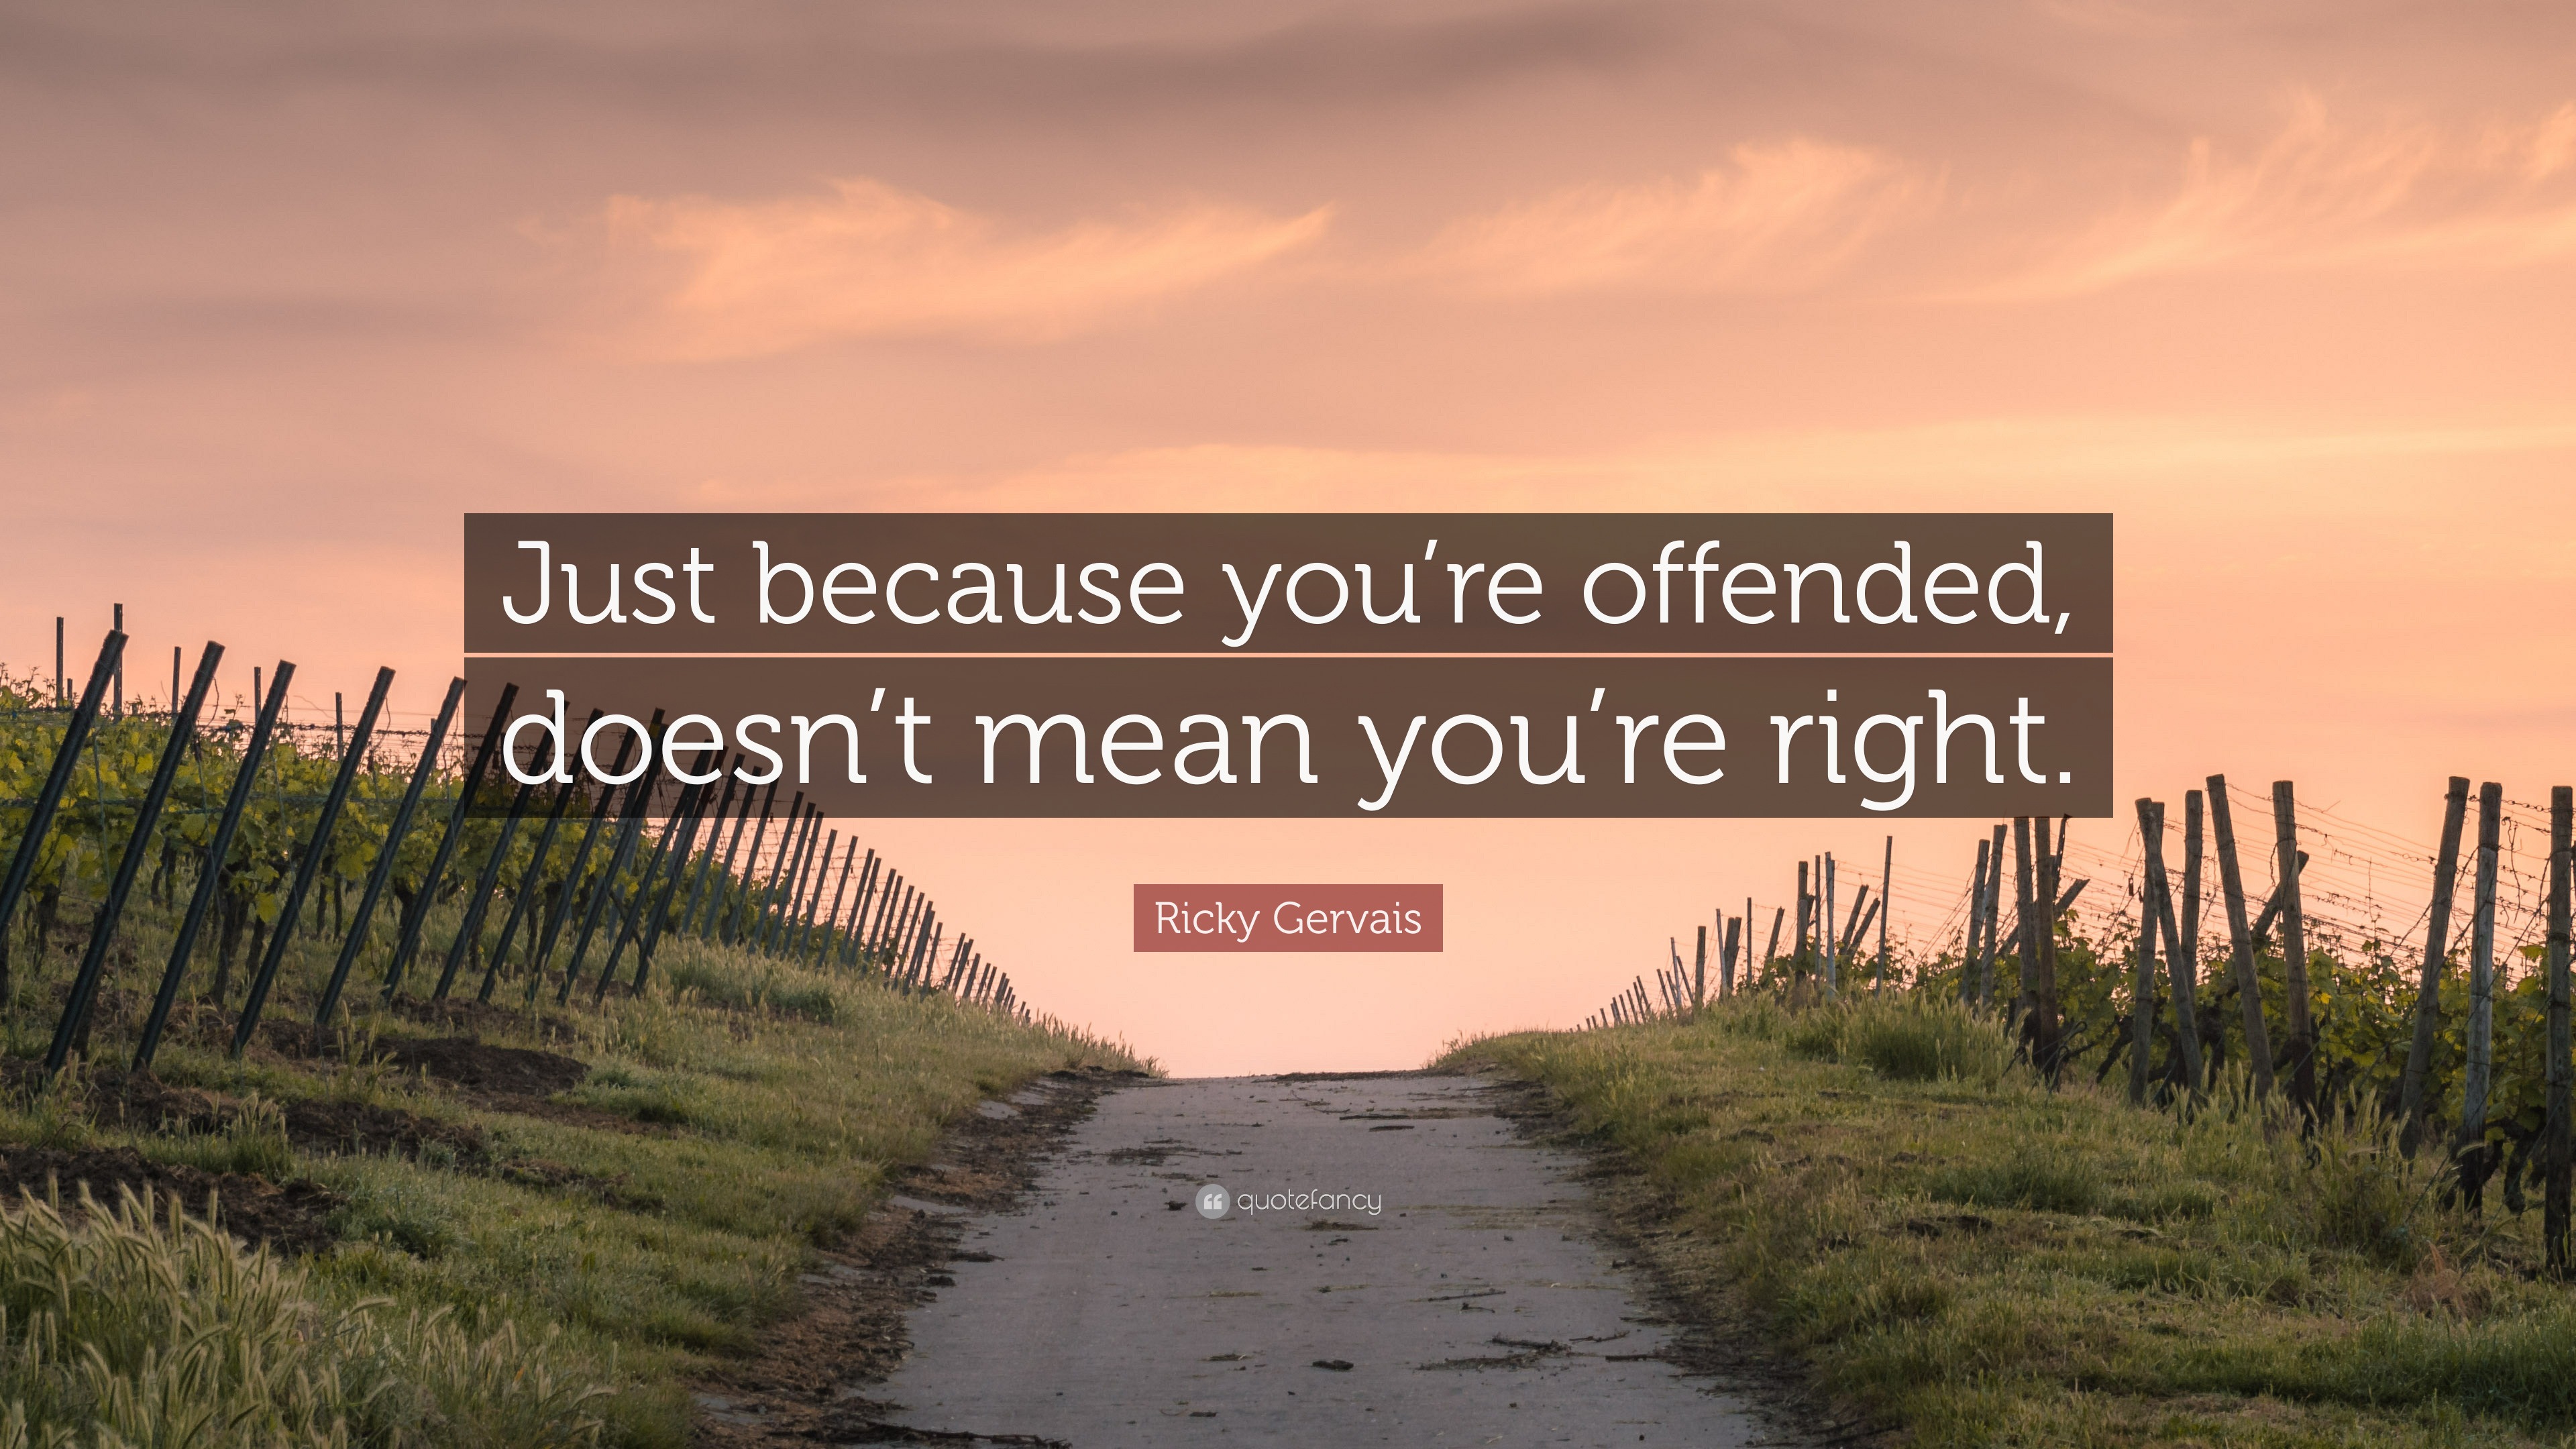 2423401-Ricky-Gervais-Quote-Just-because-you-re-offended-doesn-t-mean-you.jpg